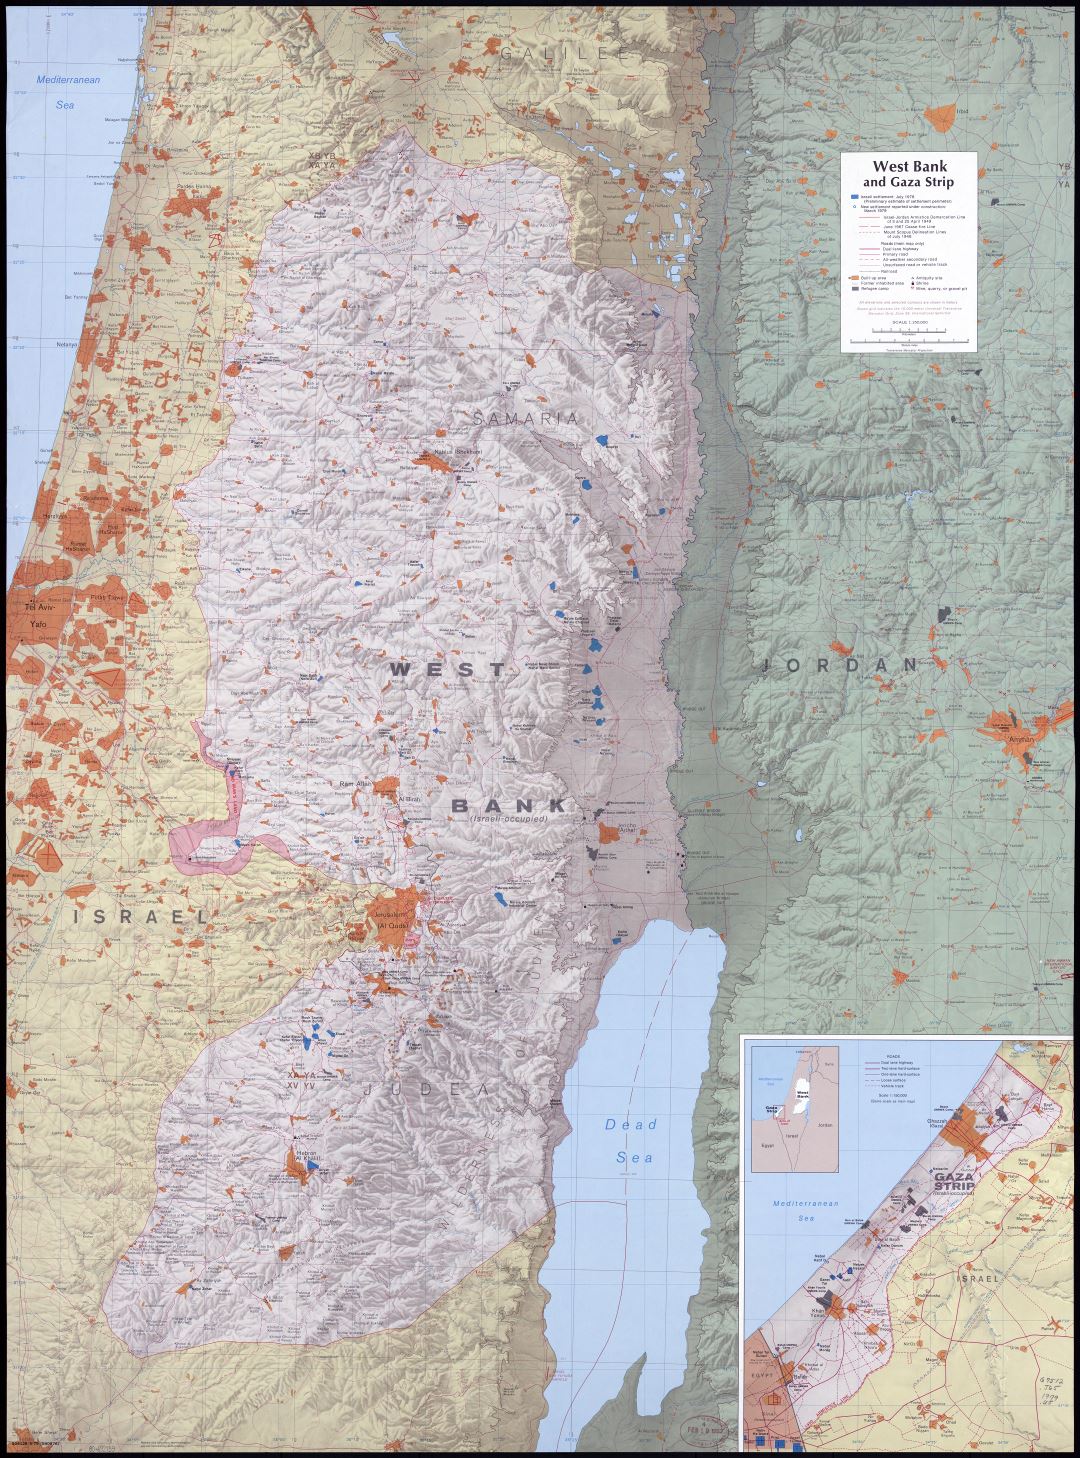 Large scale detailed map of West Bank and Gaza Strip with relief, roads, cities and other marks